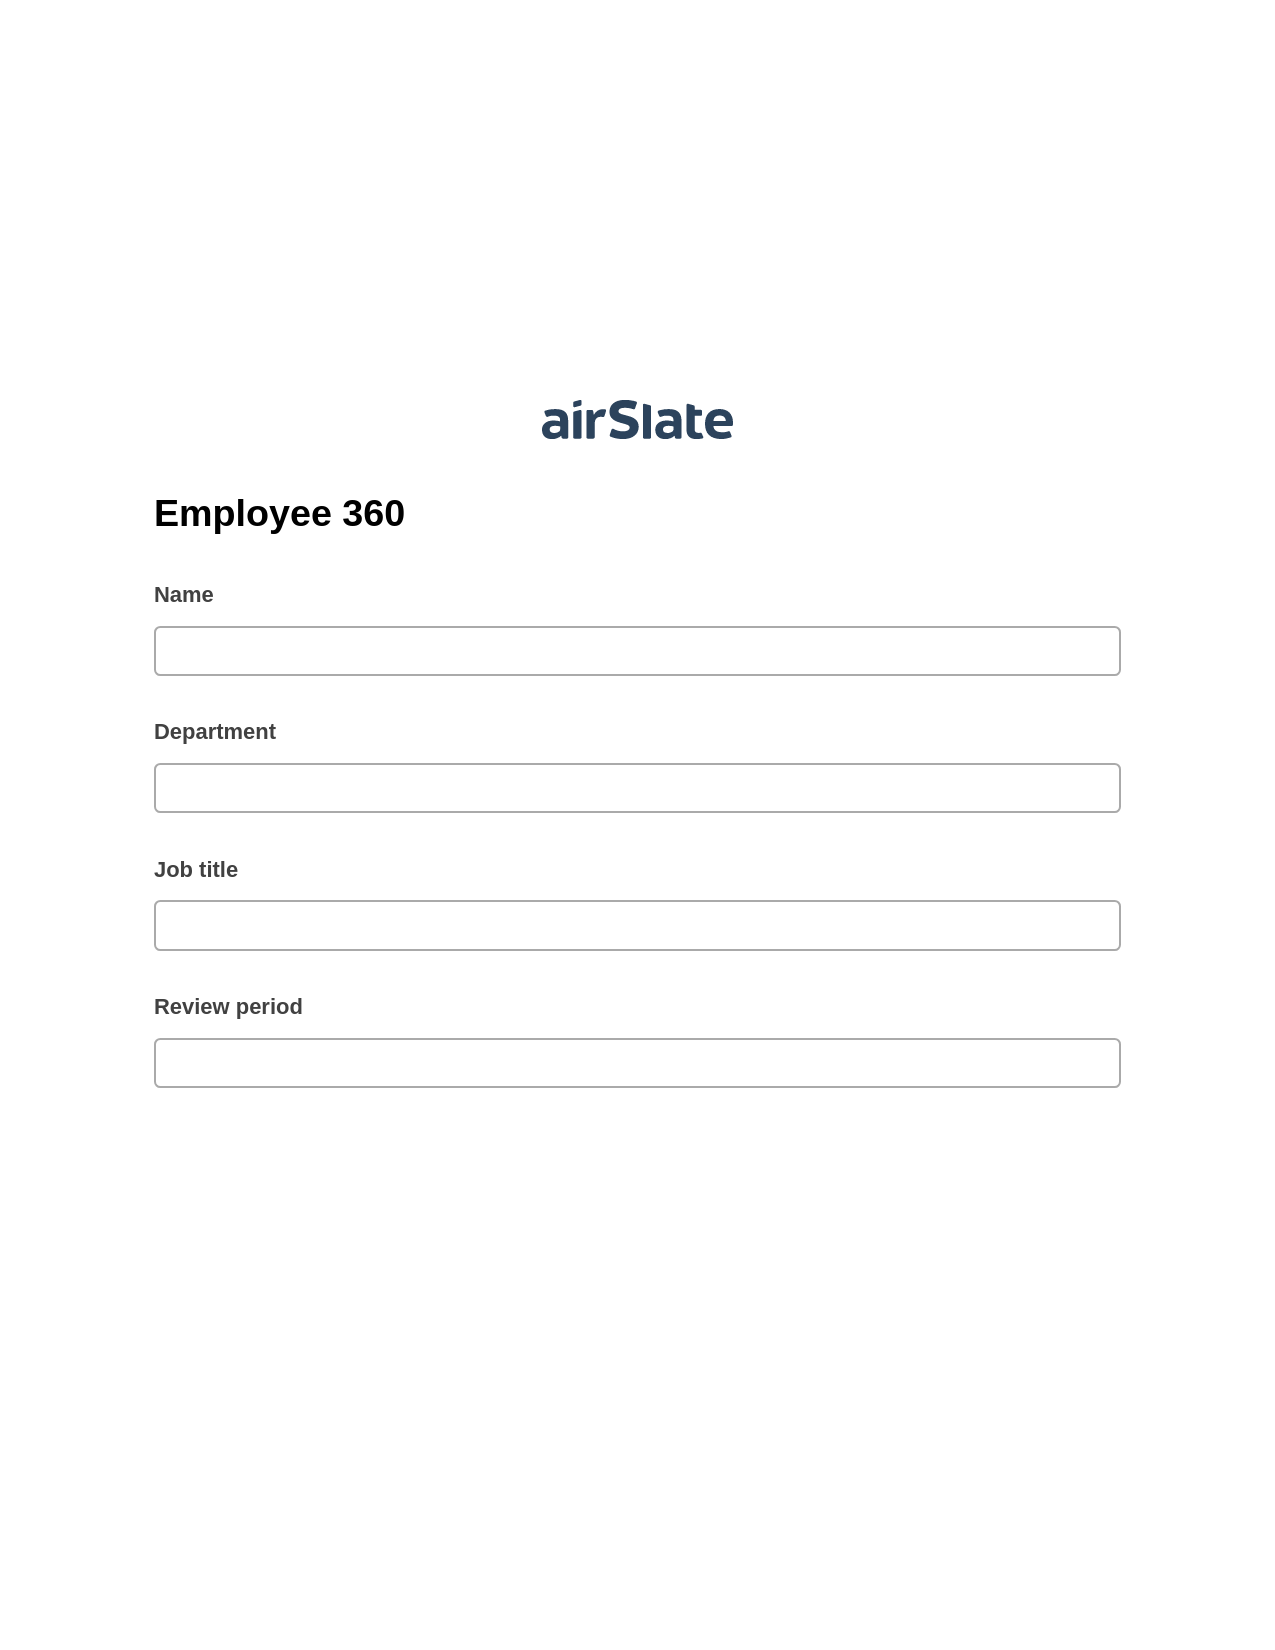 Employee 360 Pre-fill from Salesforce Records Bot, Update Audit Trail Bot, Archive to SharePoint Folder Bot